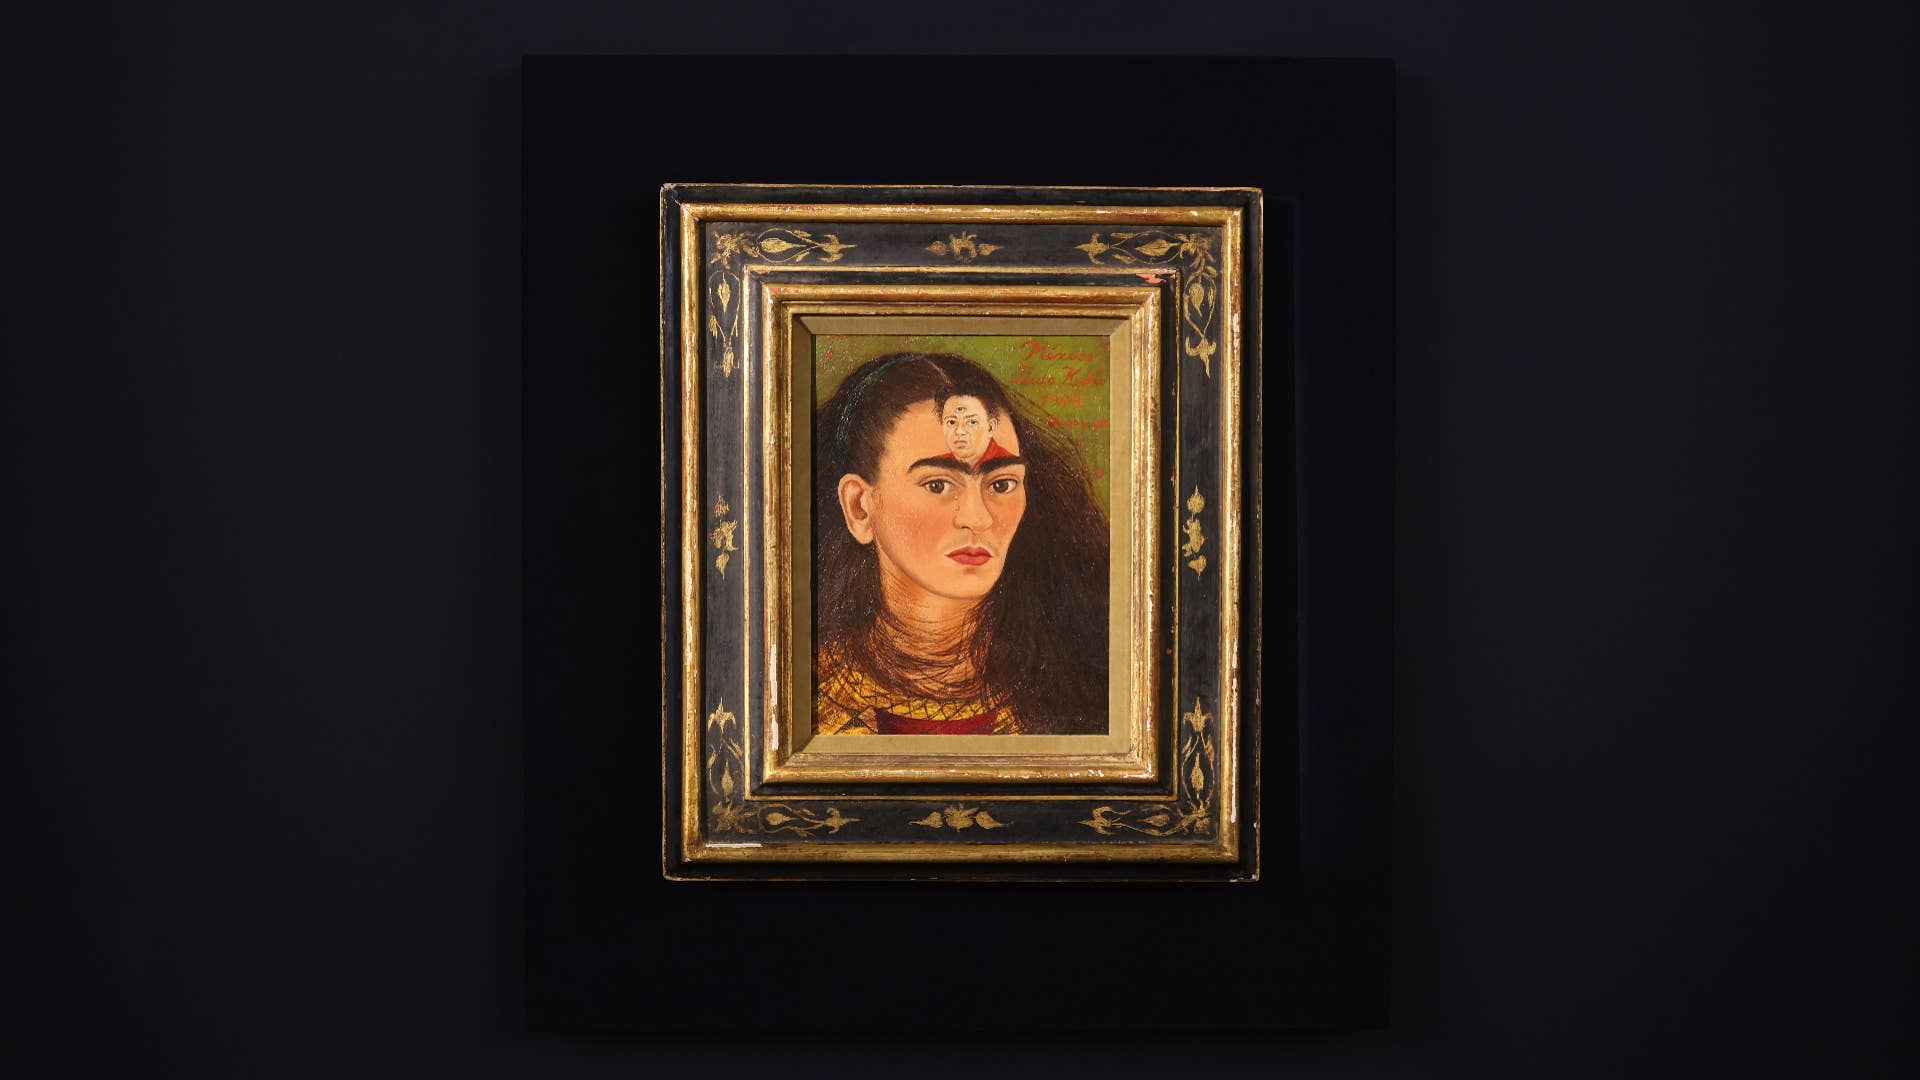 View of Frida Kahlo's 'Diego y yo' painting.